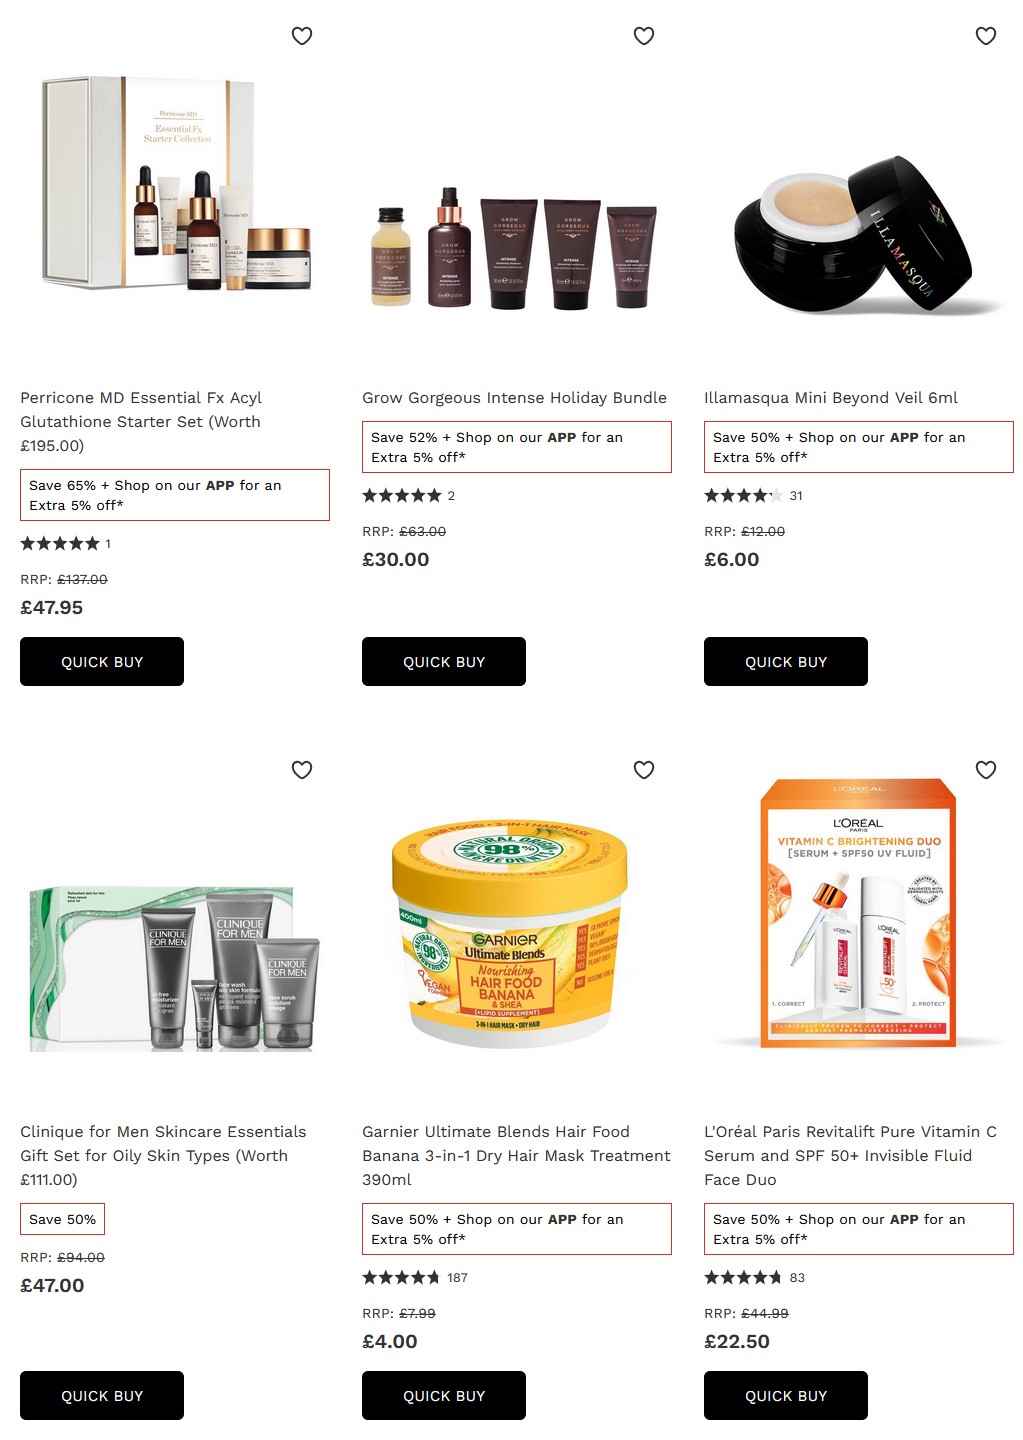 Up to 50% off selected products at Lookfantastic